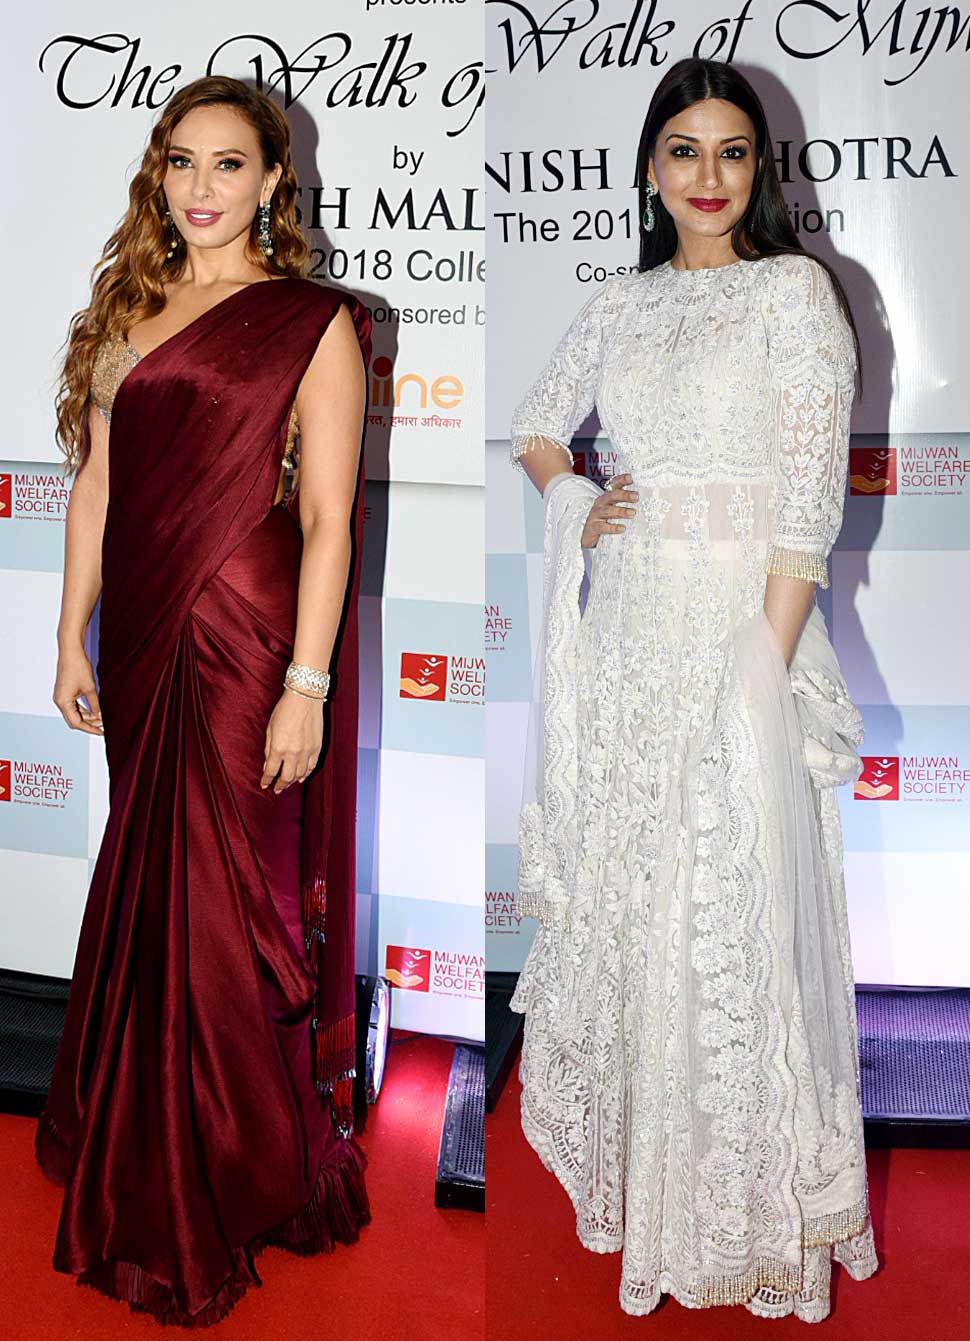 Ranbir and Deepika weren’t the only stars who dazzled at Manish Malhotra’s show